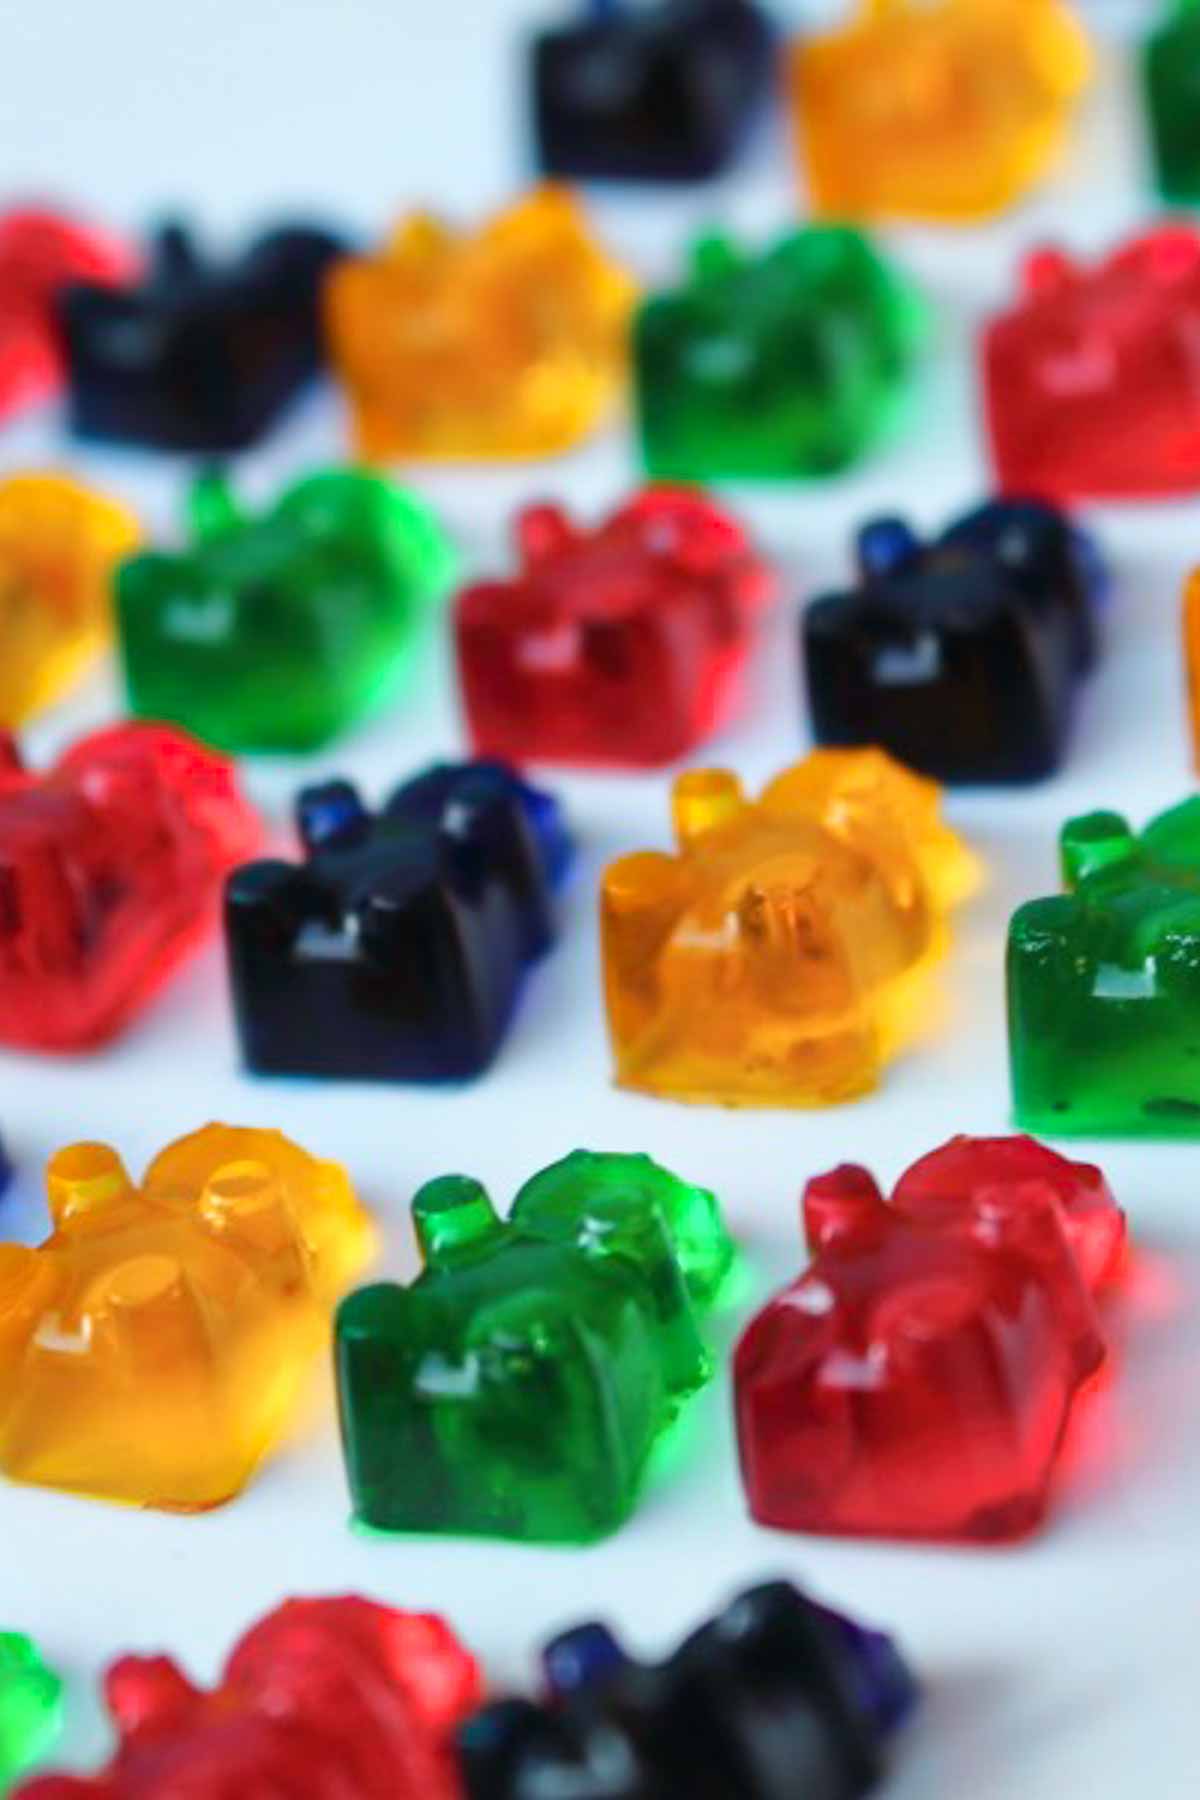 sugar free gummy bears on a white surface.